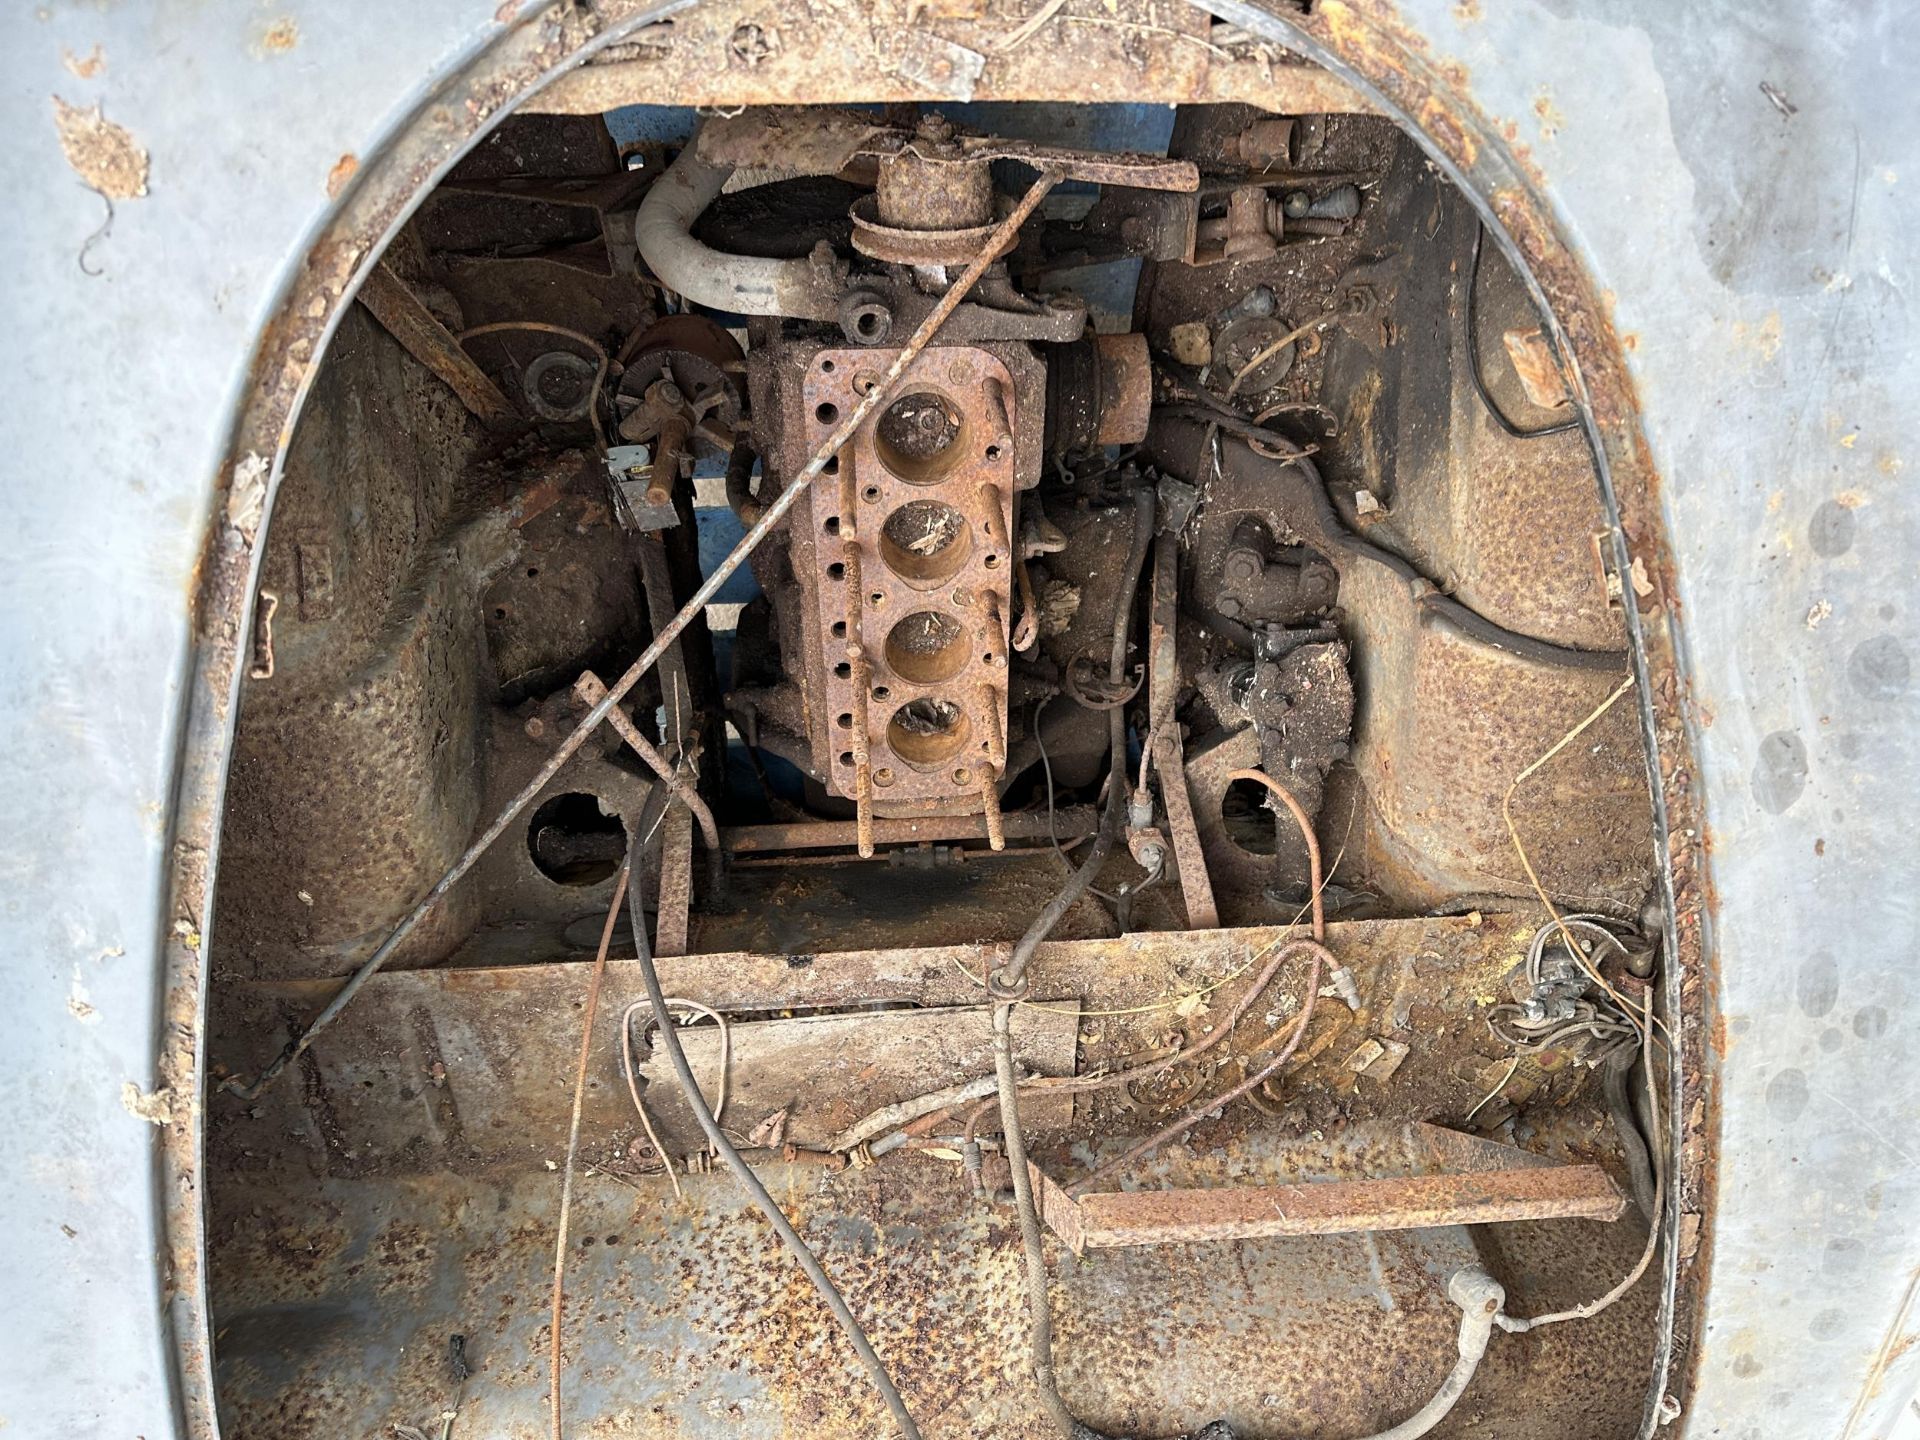 A VINTAGE AUSTIN A30 BARN FIND RESTORATION PROJECT COMPLETE WITH A NUMBER OF SPARE PARTS TO - Image 8 of 19